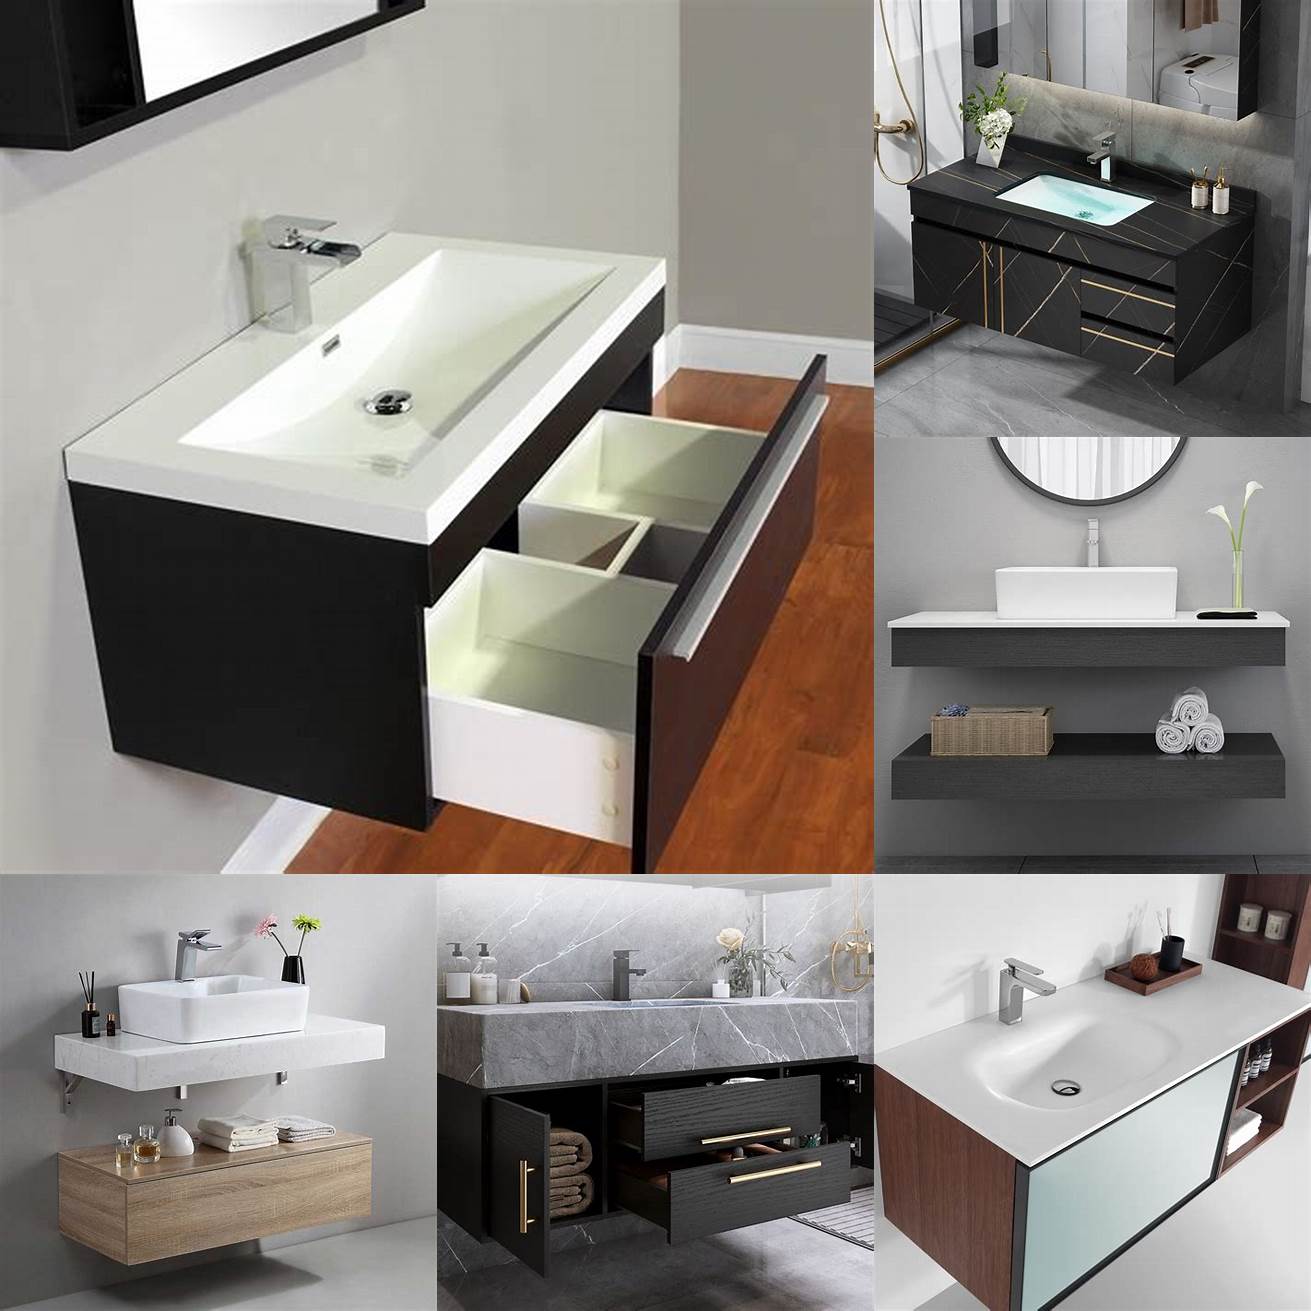 Image 1 A sleek and modern wall mounted vanity with a white countertop and black drawer fronts